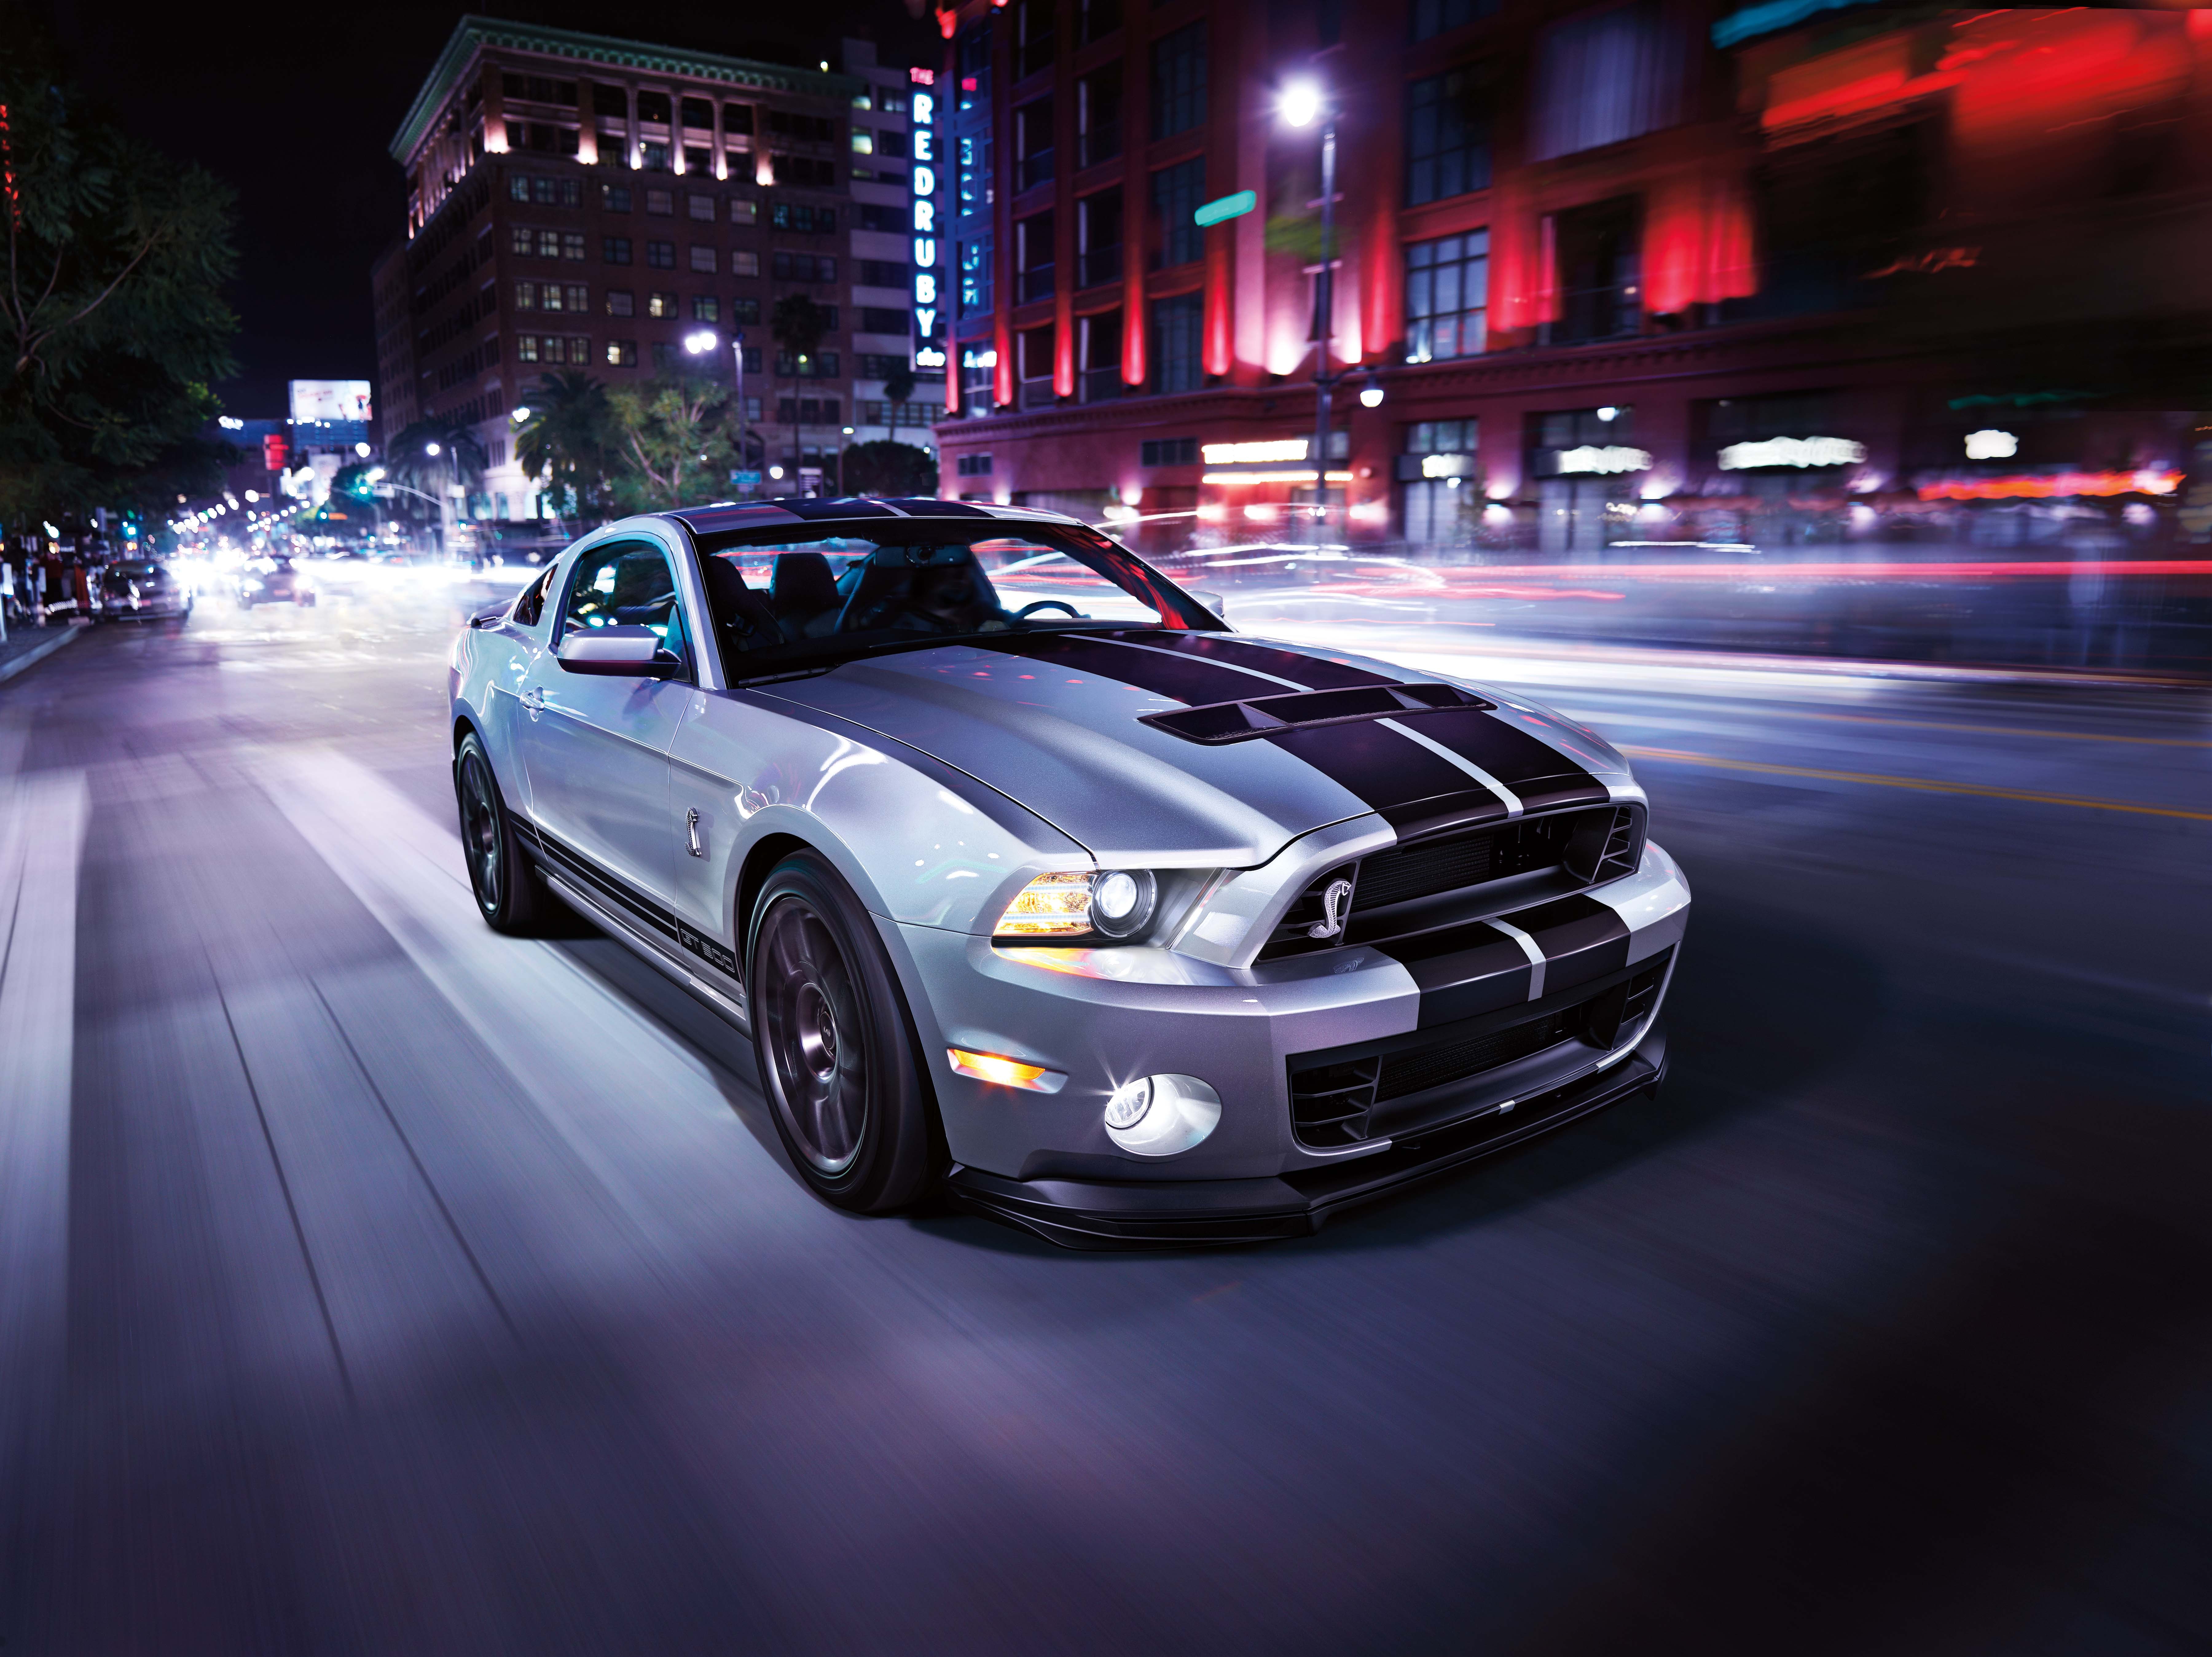 General 7200x5395 motion blur racing stripes Ford Mustang Ford car vehicle silver cars Ford Mustang S-197 II American cars muscle cars